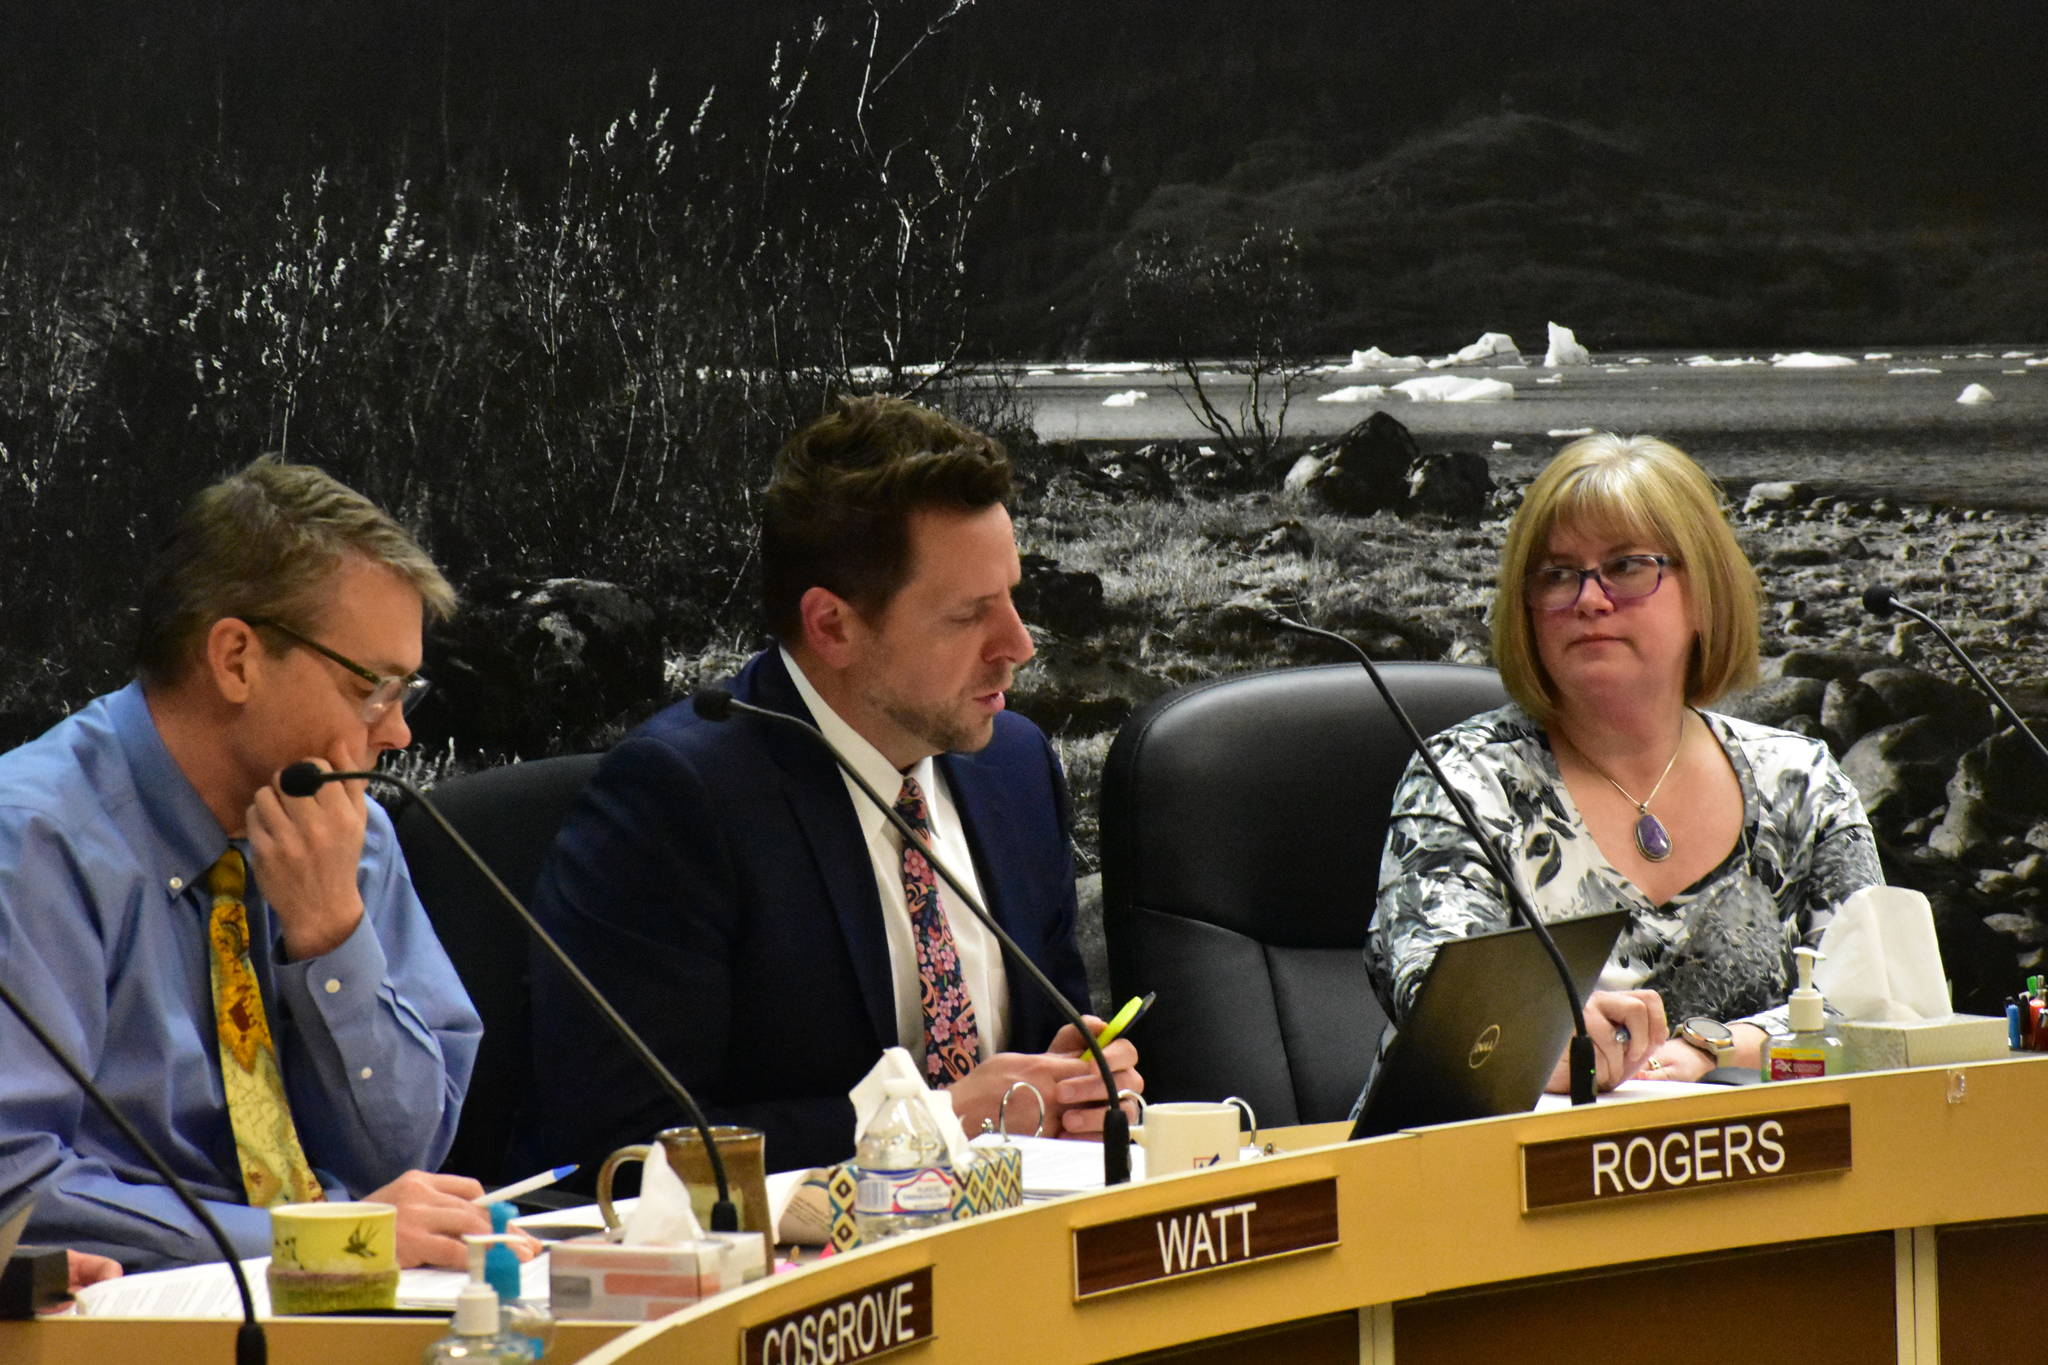 Finance Director Jeff Rogers, center, presents information at the Assembly Finance Committee meeting at City Hall on Wednesday, Jan. 8, 2020. (Peter Segall | Juneau Empire)